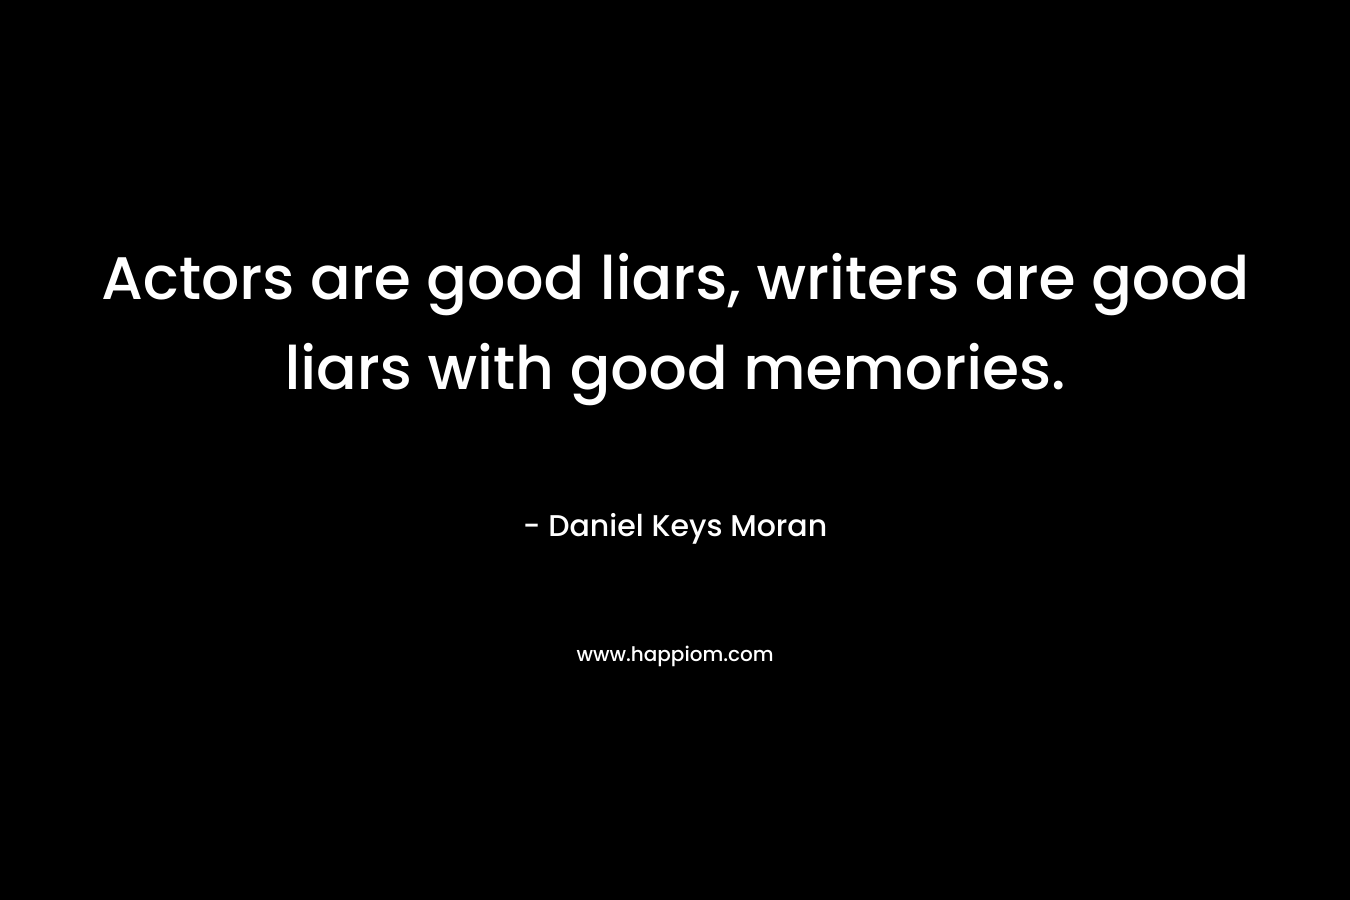 Actors are good liars, writers are good liars with good memories.